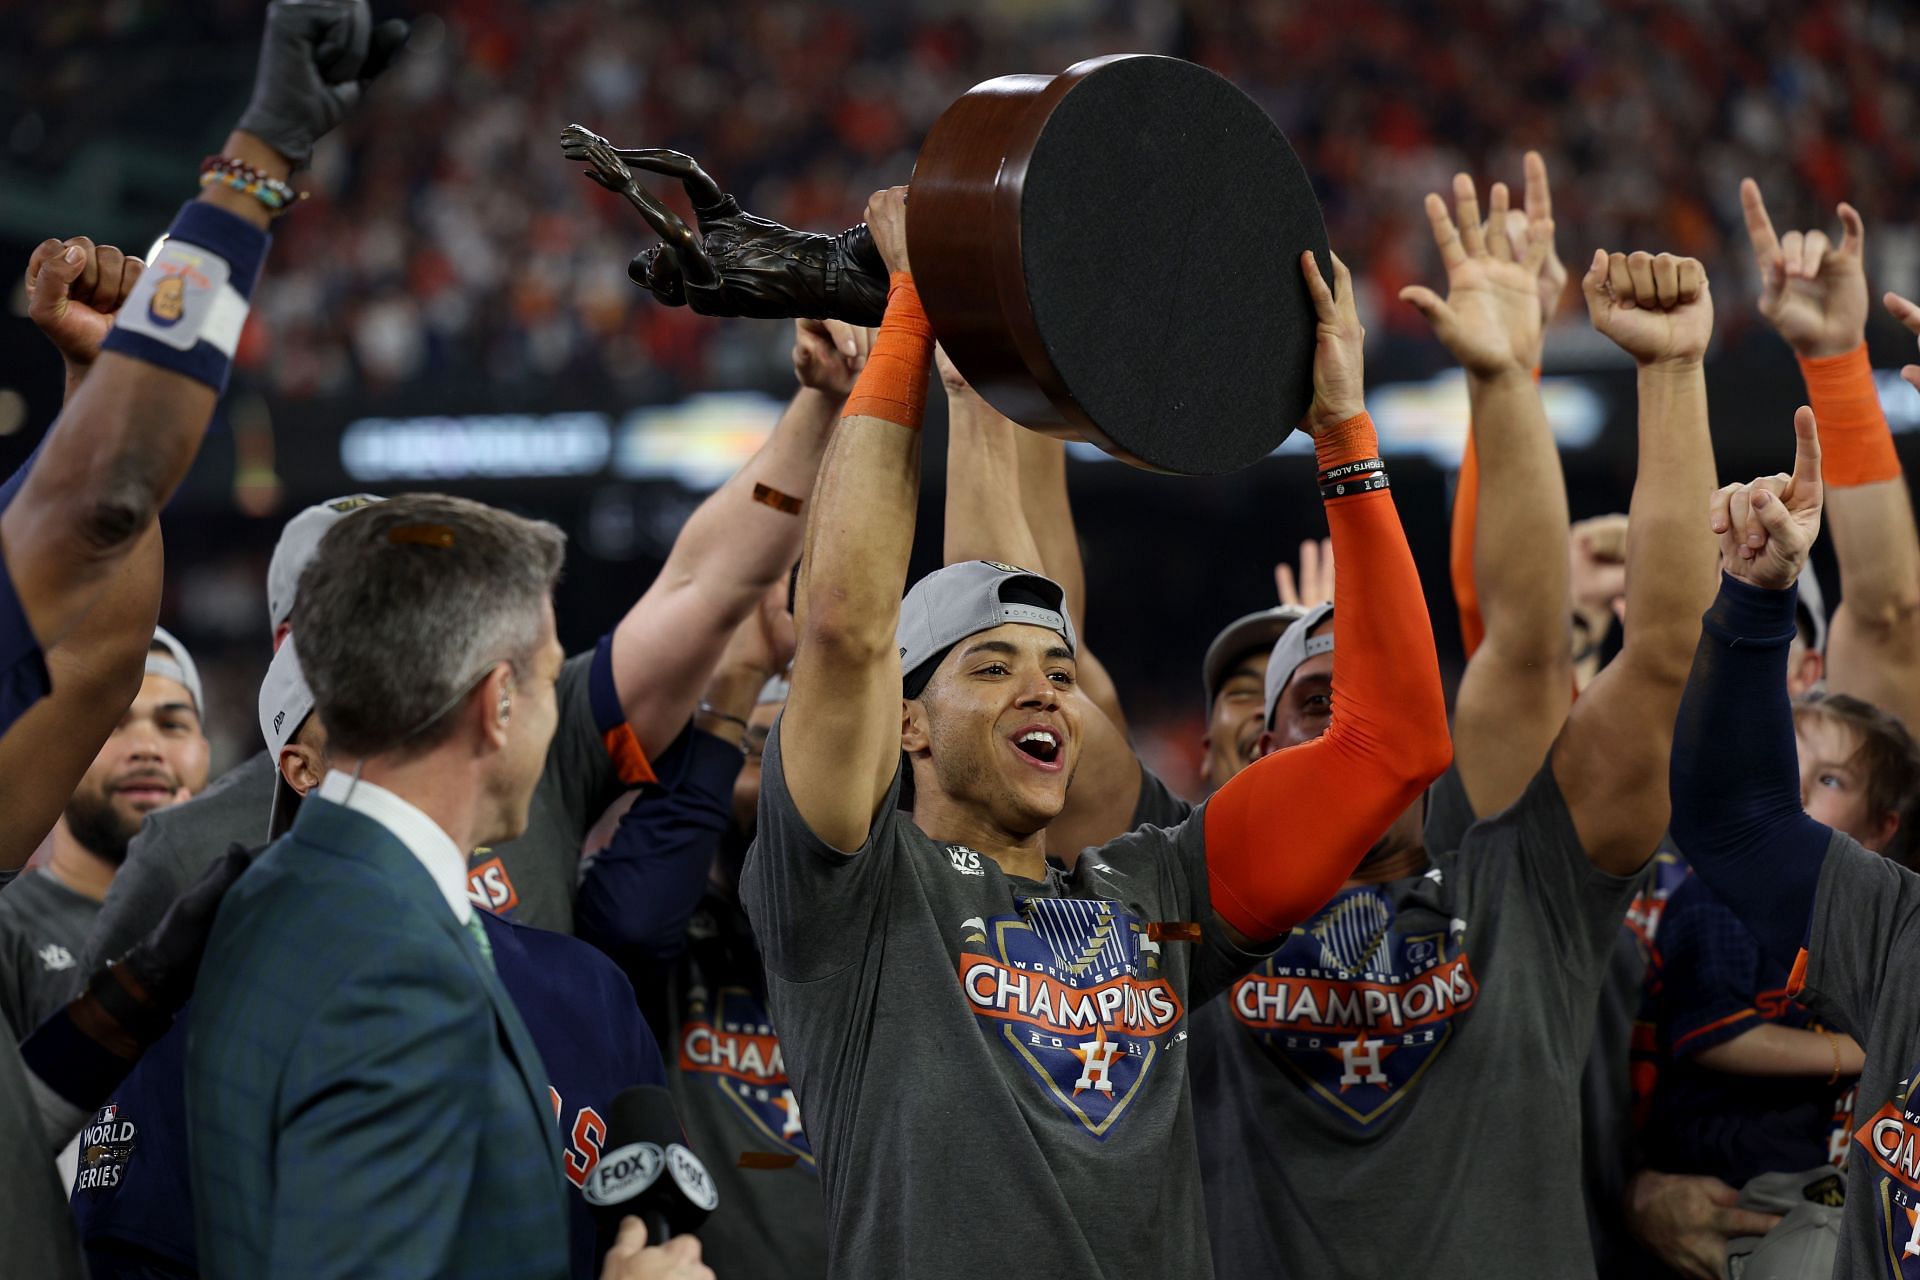 Jeremy Pena lifts the Willie Mays World Series Most Valuable Player Award after defeating the Philadelphia Phillies in the 2022 World Series